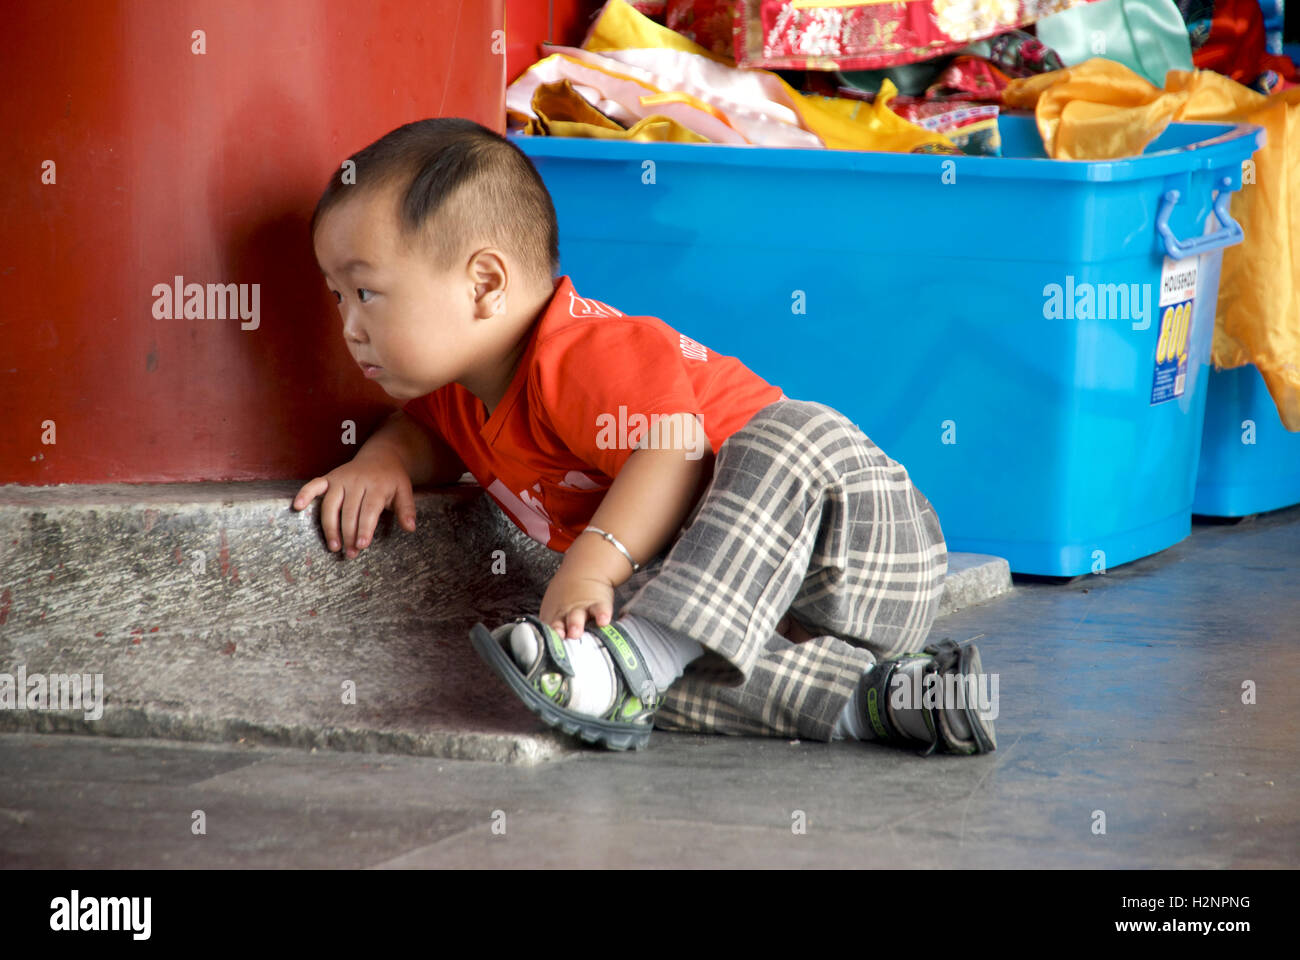 97364 Young Chinese Boy Images Stock Photos  Vectors  Shutterstock